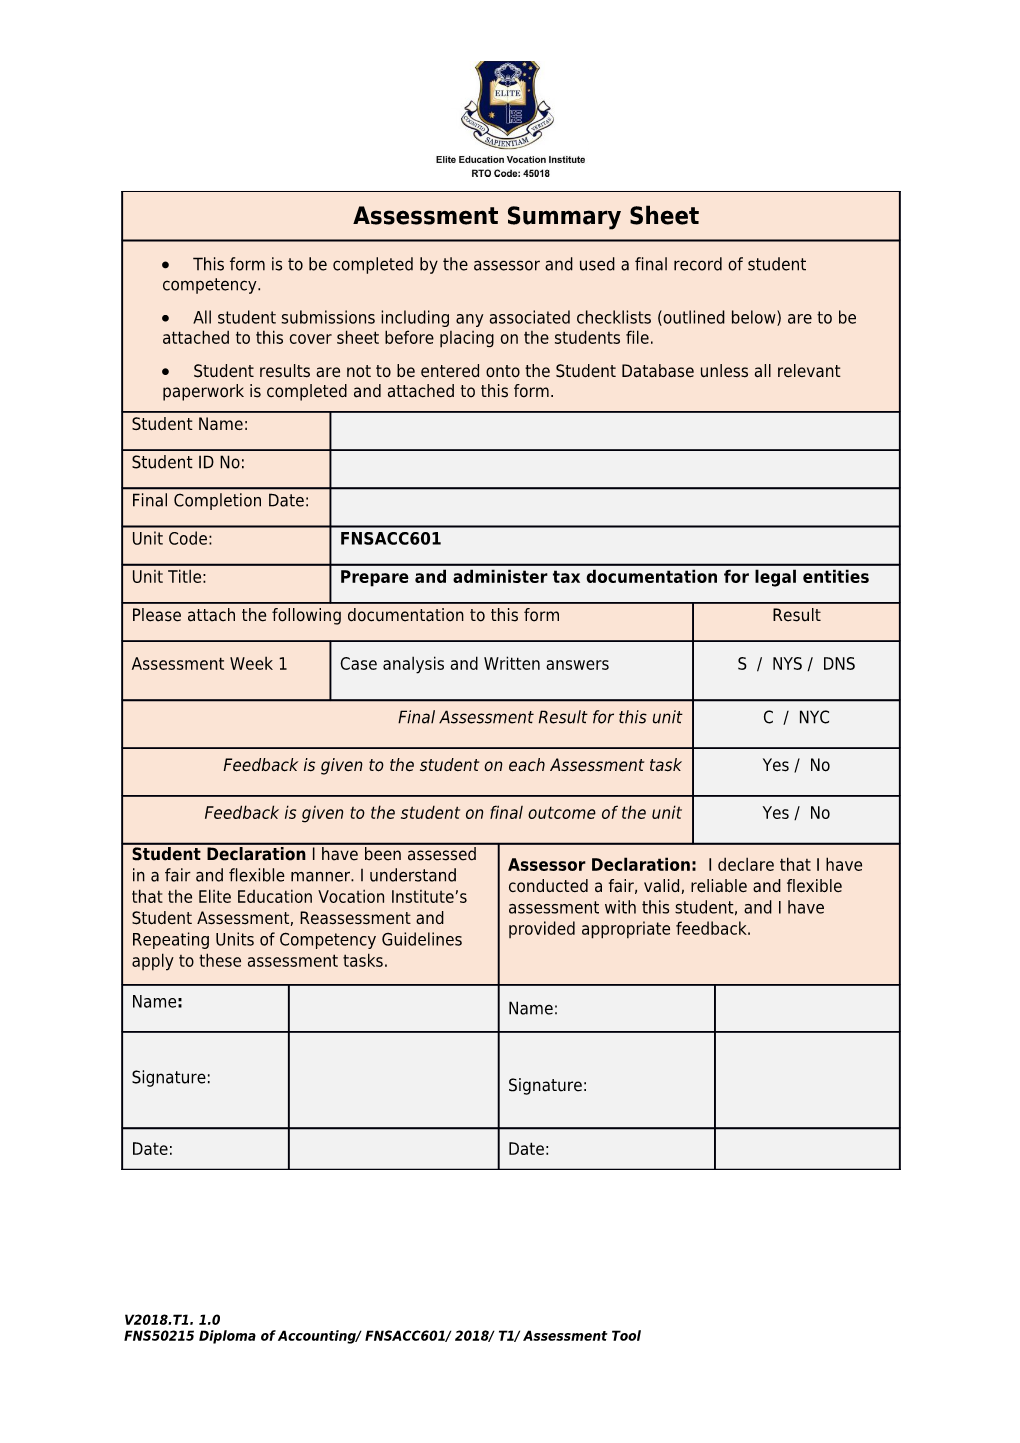 This Form Is to Be Completed by the Assessor and Used a Final Record of Student Competency